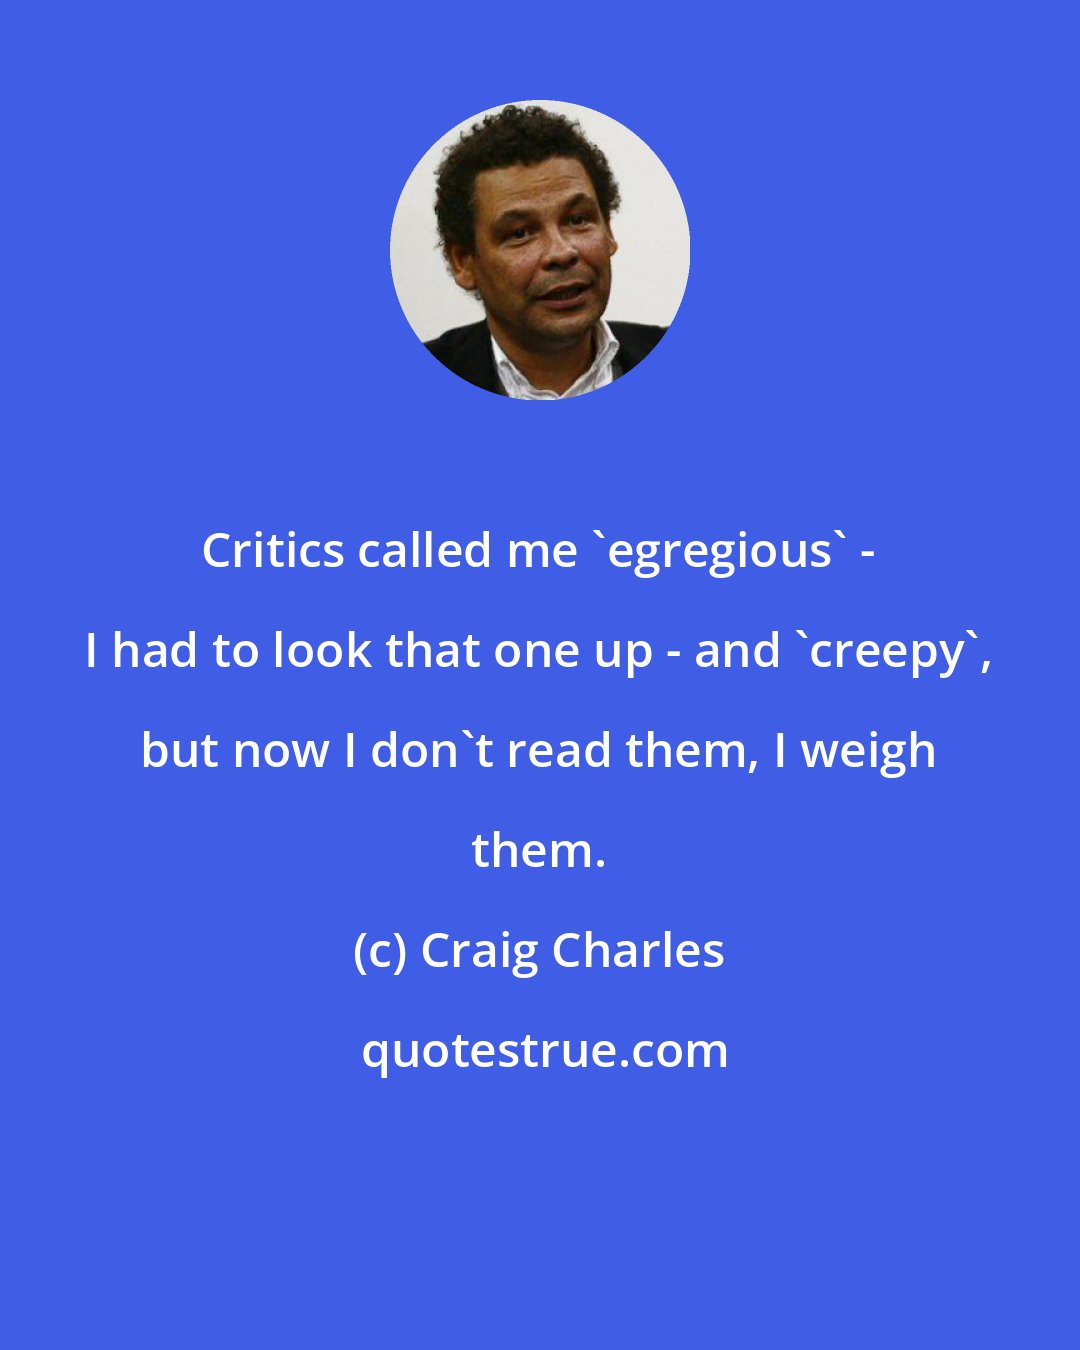 Craig Charles: Critics called me 'egregious' - I had to look that one up - and 'creepy', but now I don't read them, I weigh them.